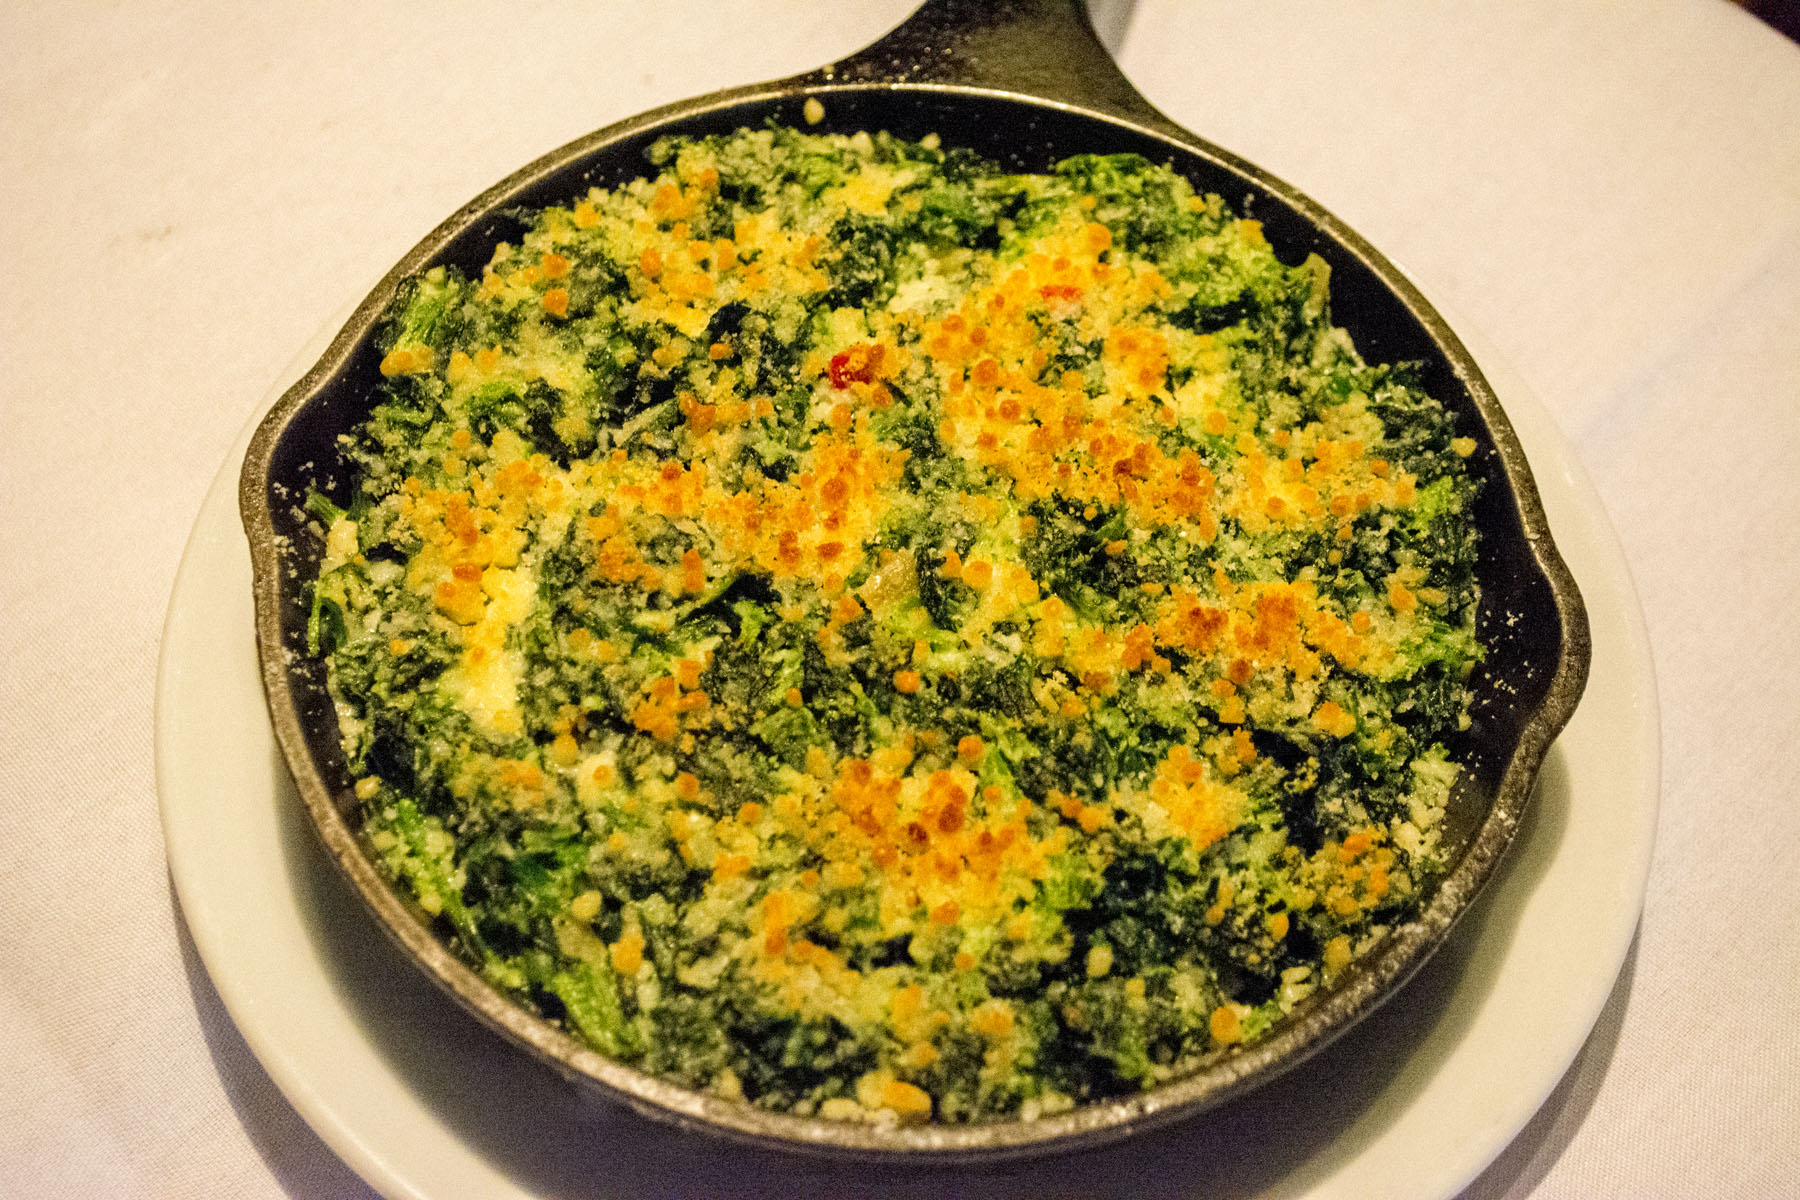   The Creamed Spinach ($5) is baked and topped with Parmesan cheese.   Long Islander News photos/Connor Beach  